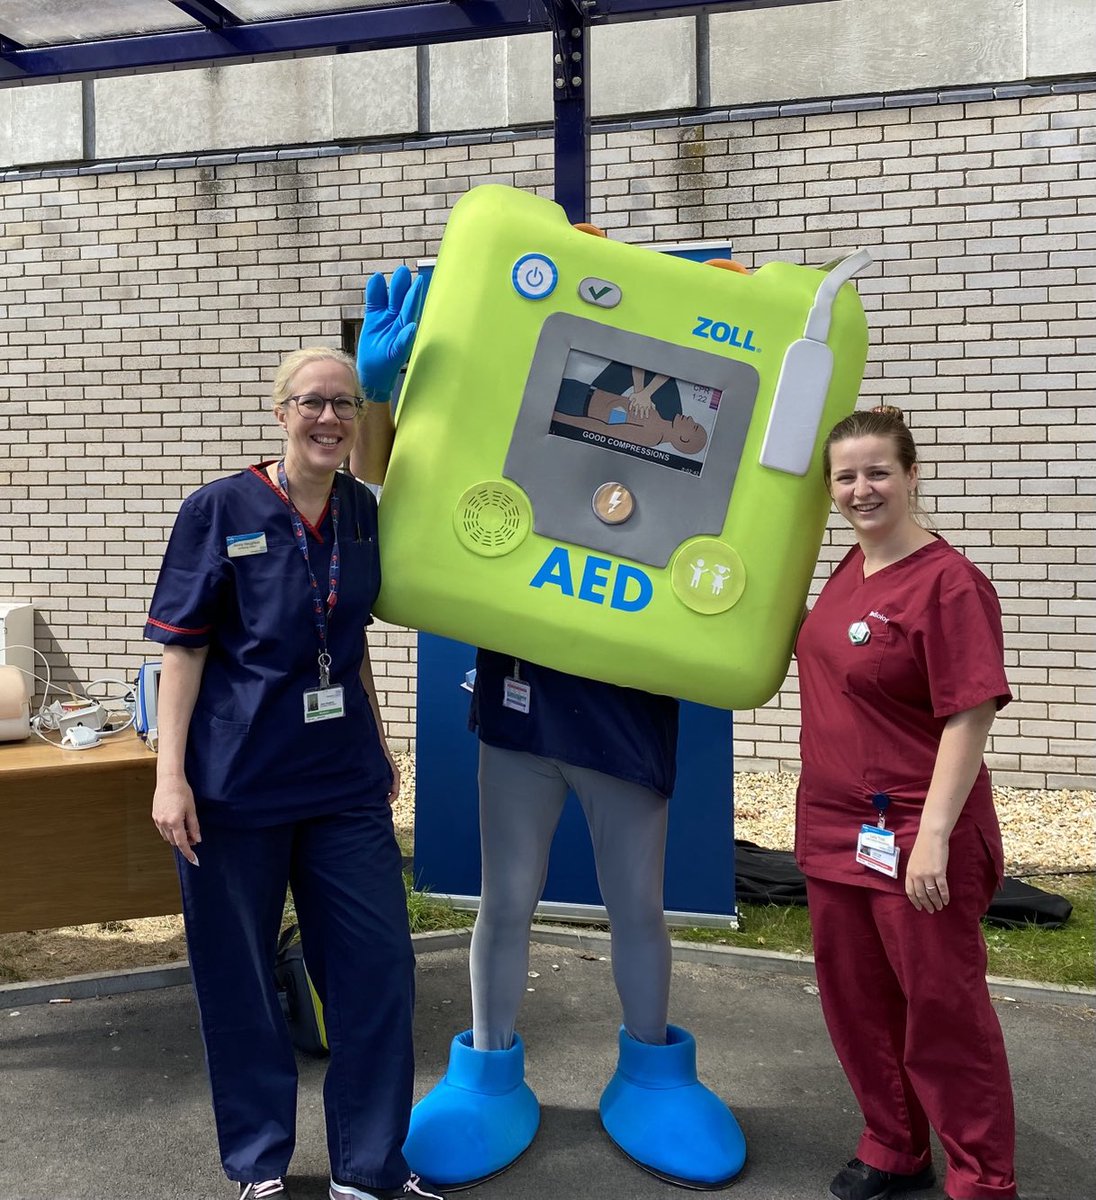 Thanks to ⁦@MedicalZoll⁩ for providing icecreams 🍦and QR codes to support the rollout of new zoll defibs. Great work from Resus team ⁦@HHFTnhs⁩ delivering areas and educating staff 🫀♥️ ⁦@LucyTrott20⁩